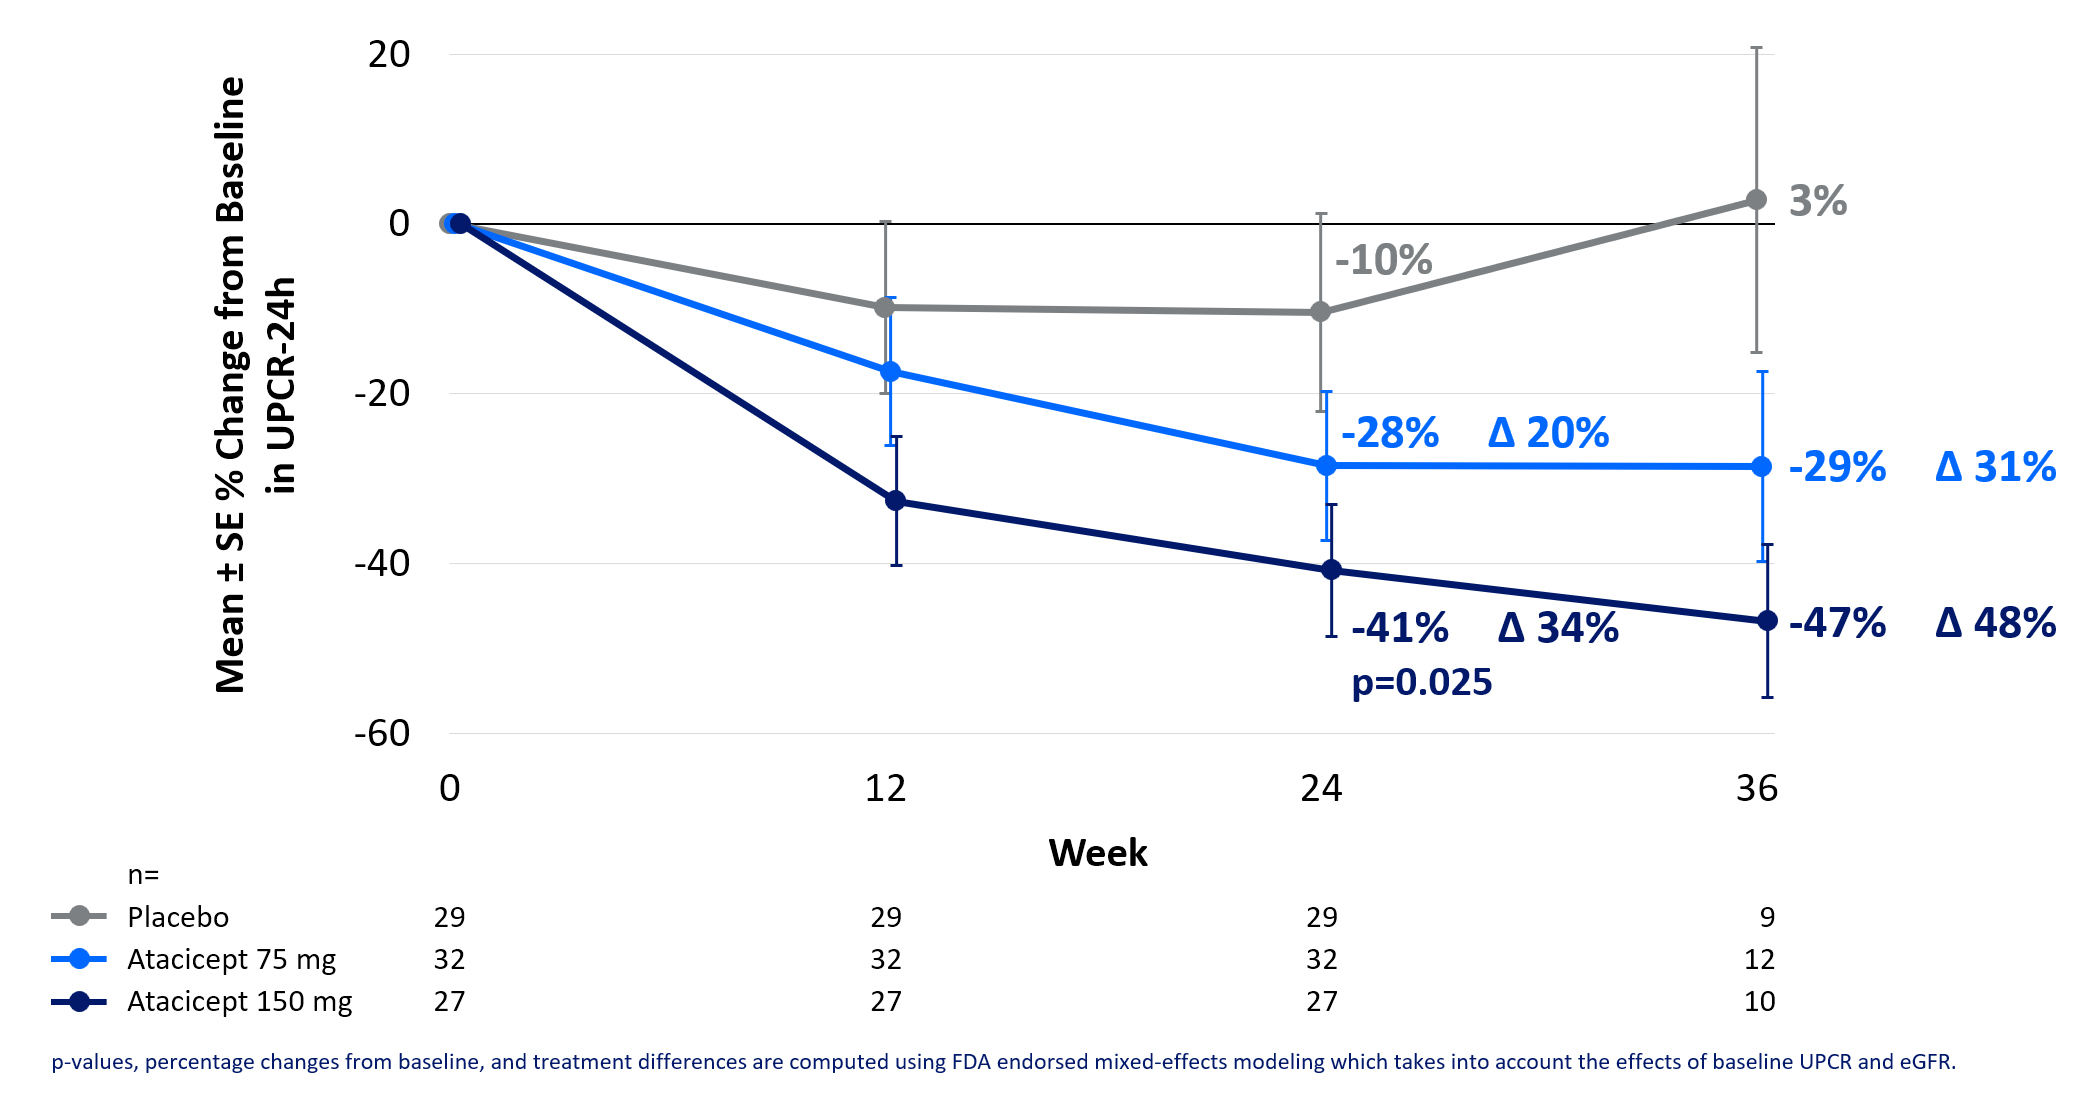 Prespecified PP Analysis: UPCR % Change In Atacicept 75 and 150 mg Through Week 36